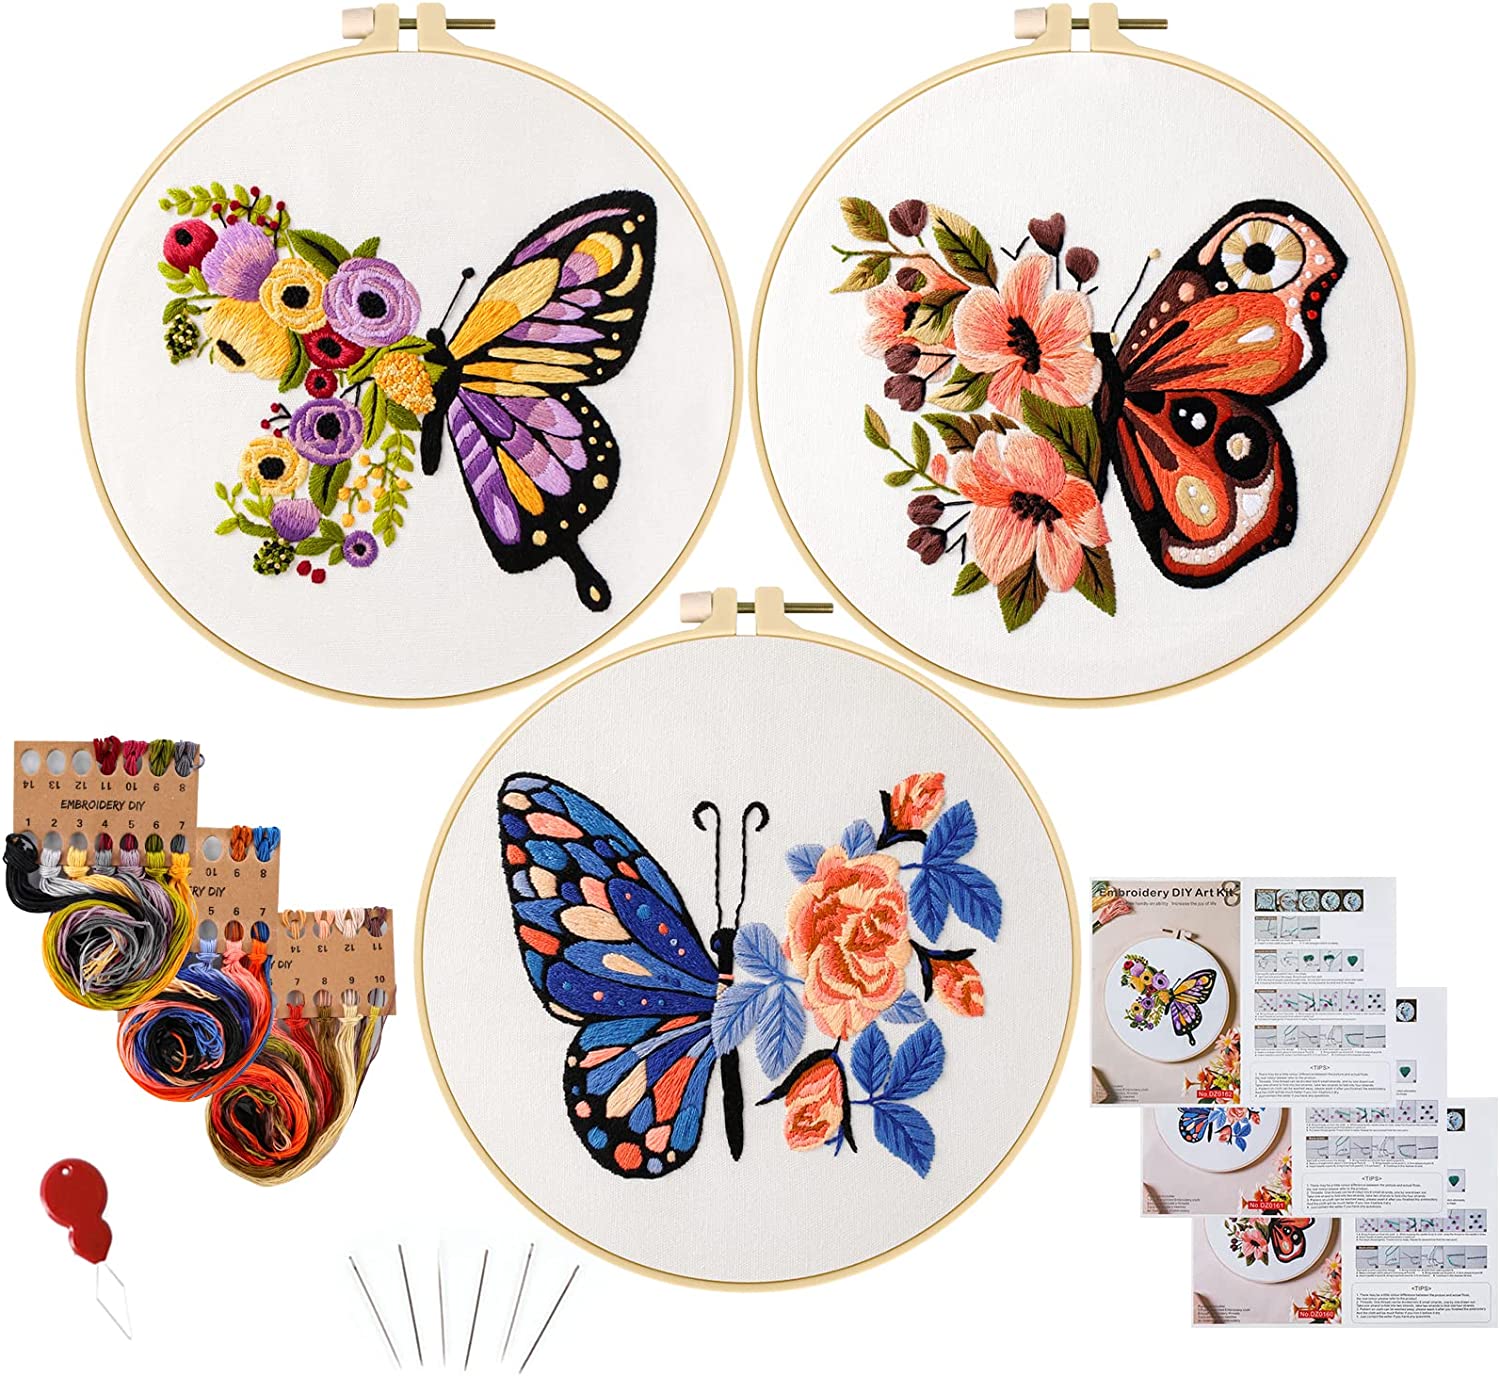 Inscraft 304 Pack Embroidery Kit, 200 Colors Threads, 5 Pcs Bamboo Embroidery Hoops, 2 Pcs Aida Cloth, Instructions, Bag and Cross Stitch Tools Set, H